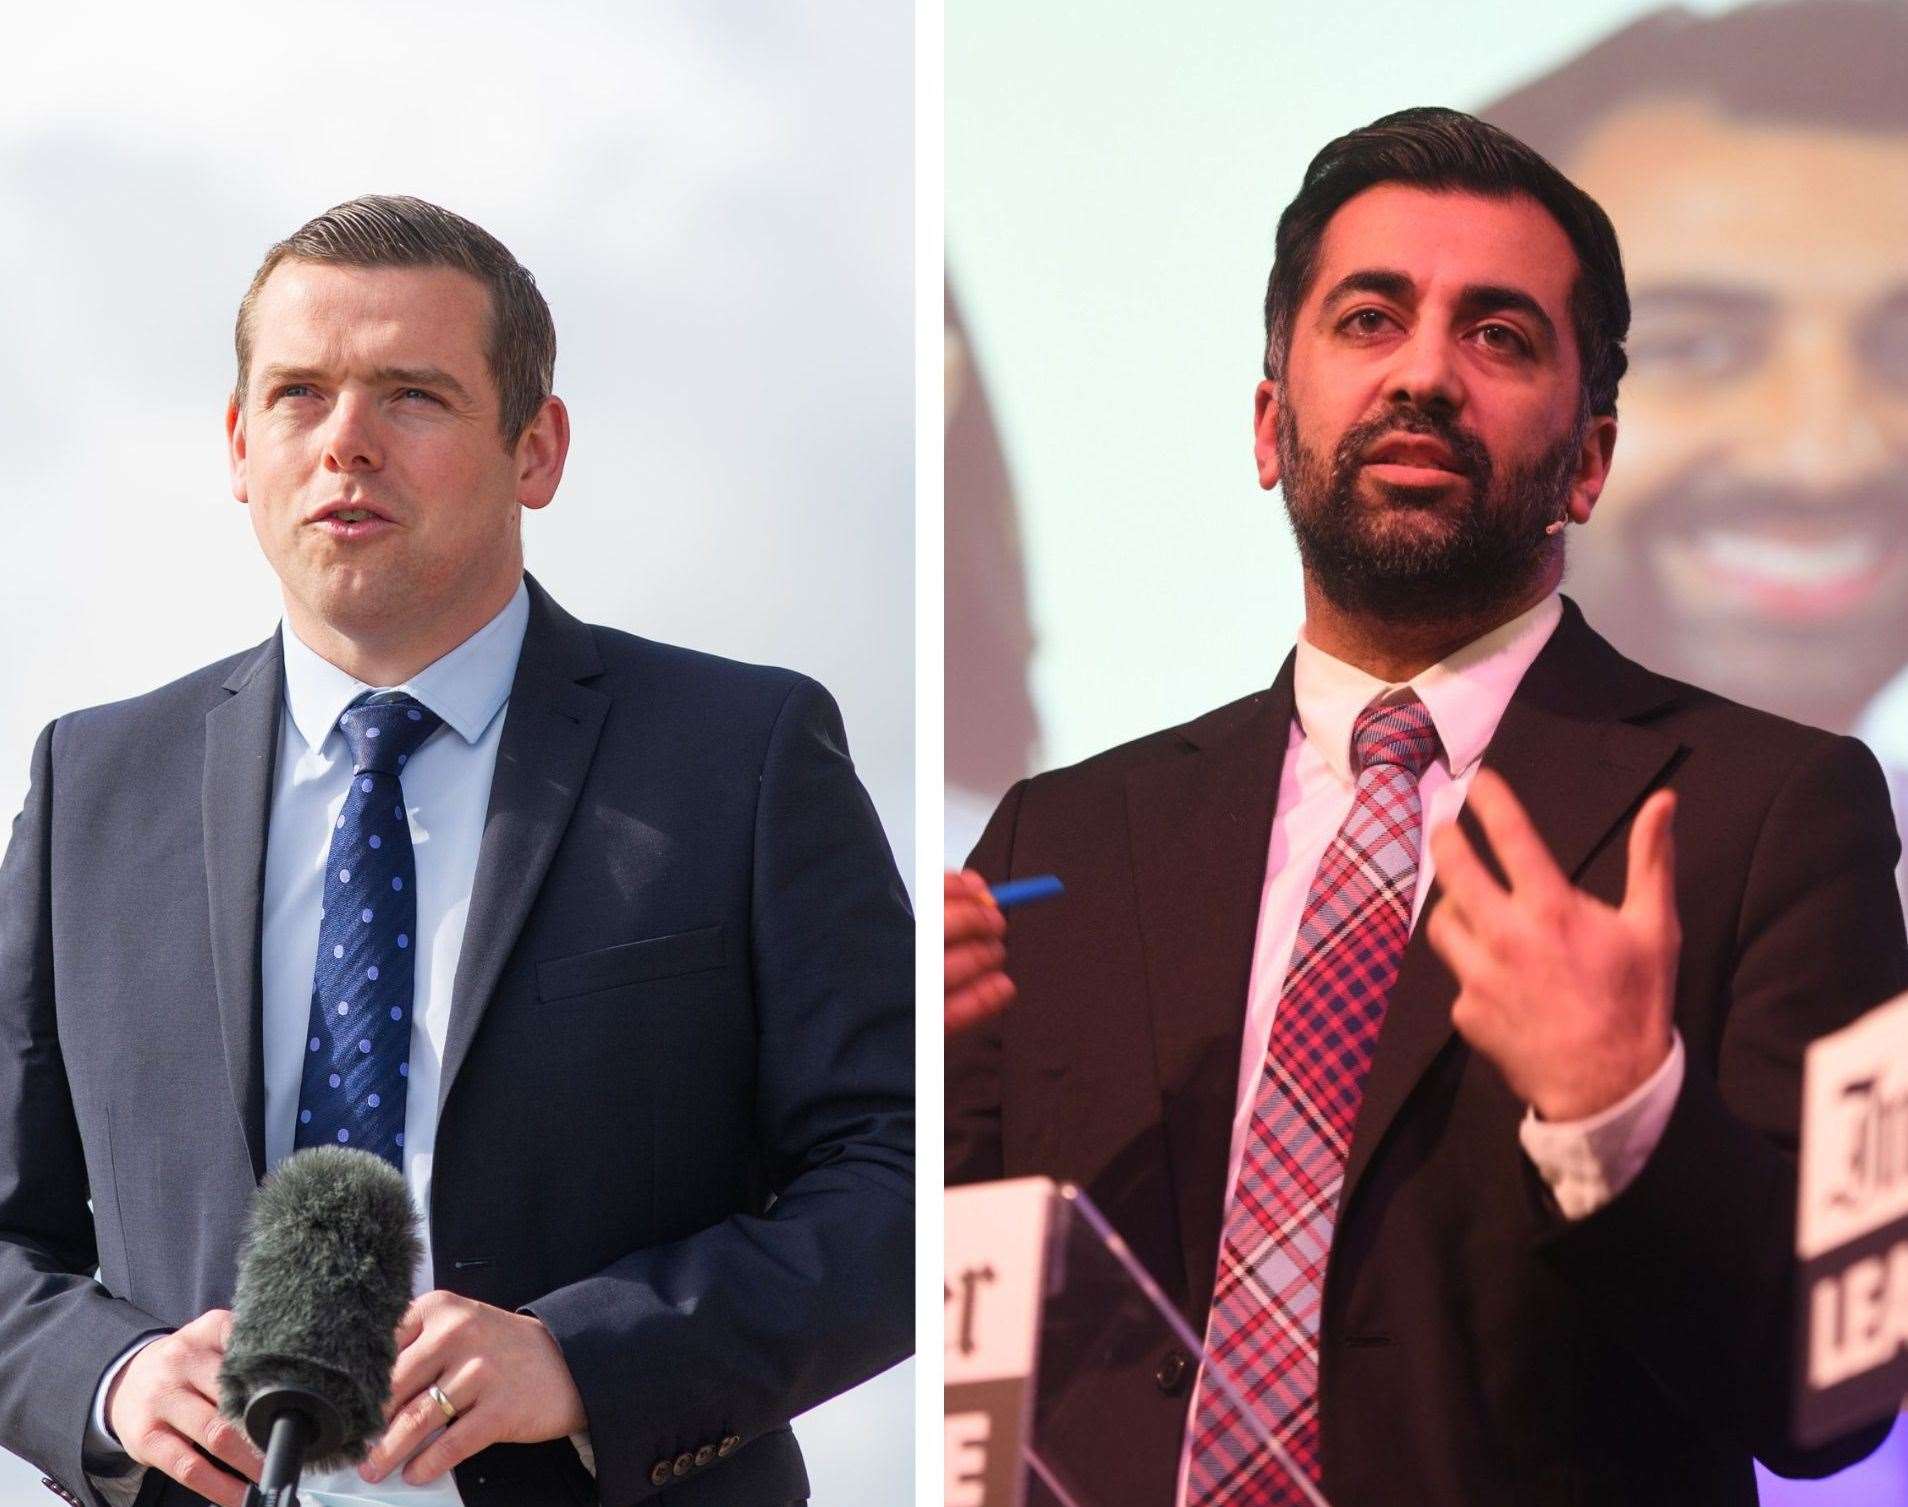 Mr Ross lodged a motion of no confidence in Humza Yousaf hours after the First Minister announced an end to the SNP's power sharing agreement with the Greens.